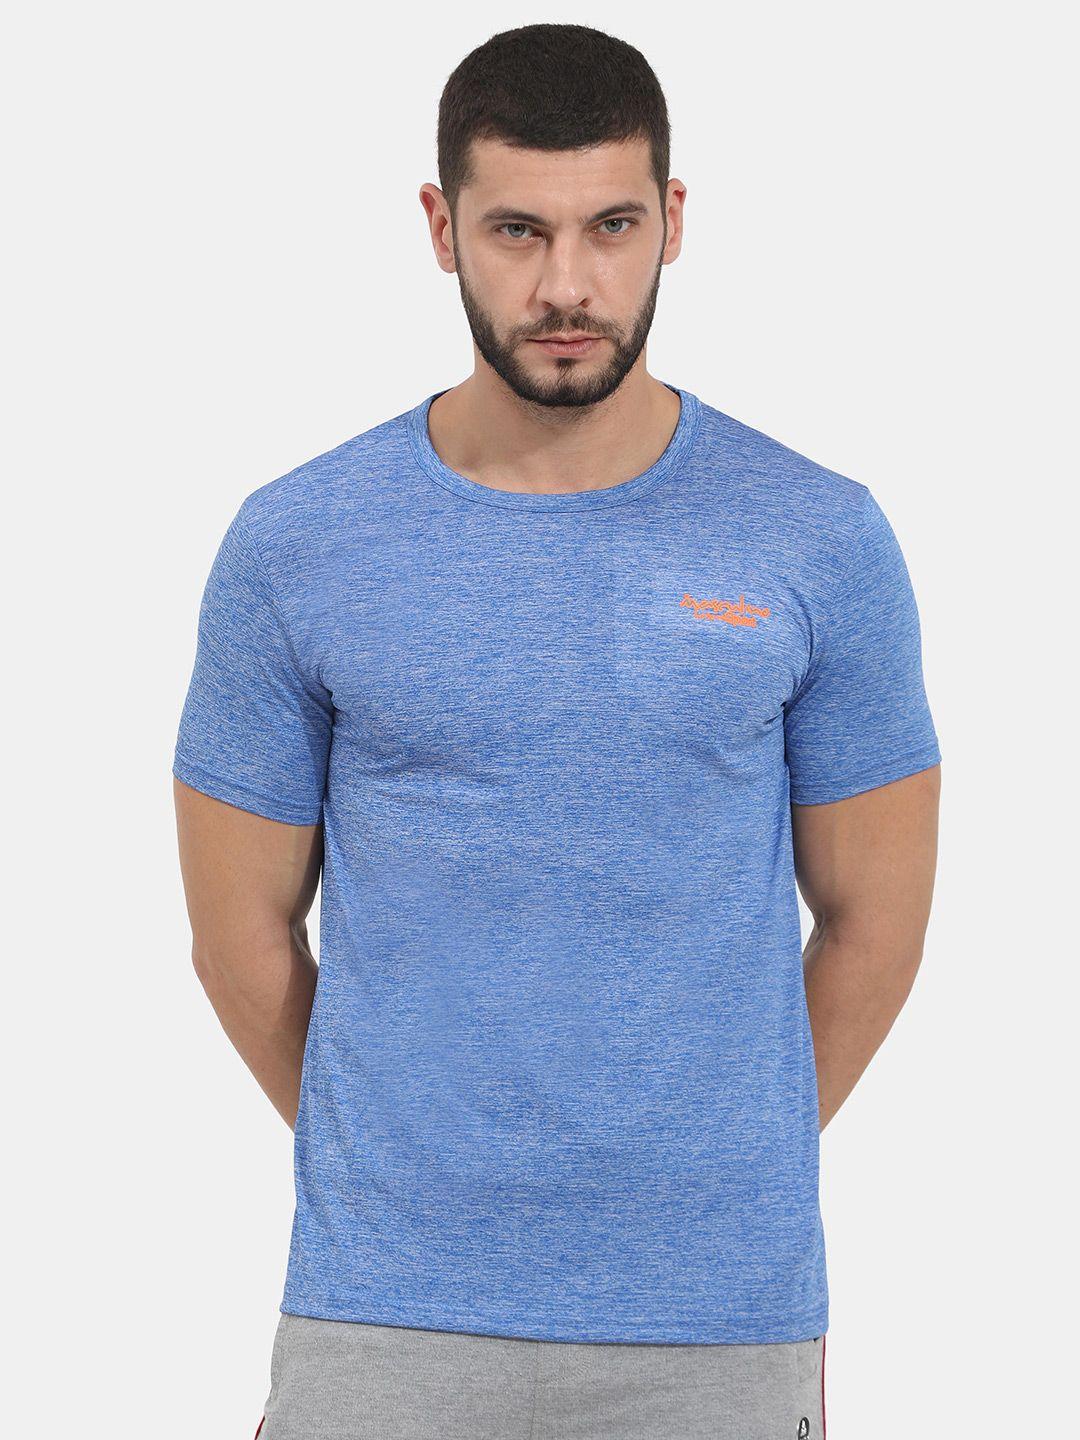 masculino latino men blue training or gym sports t-shirt with rapid dry technology